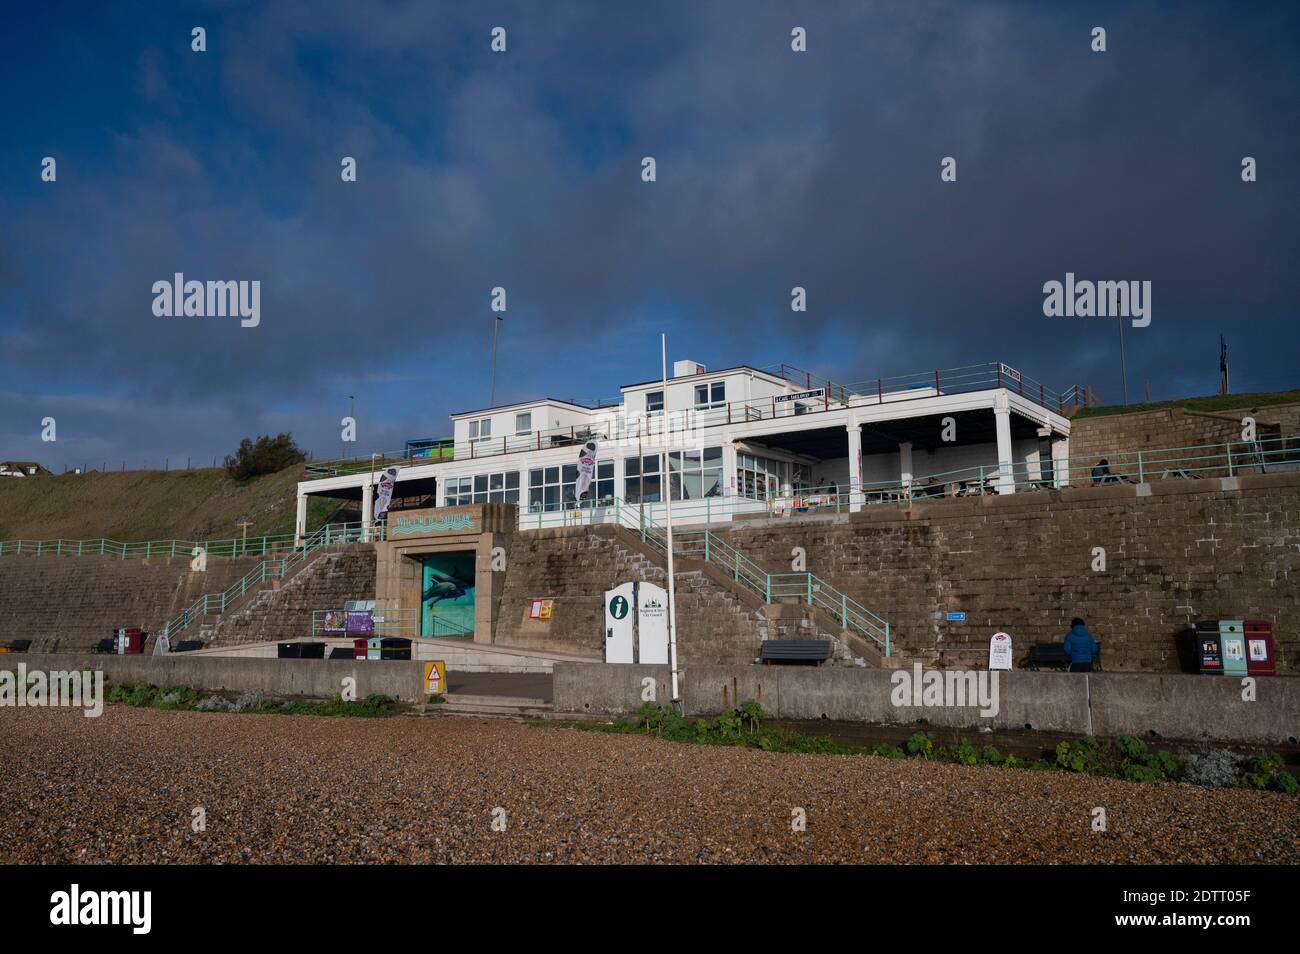 Saltdean Brighton East Sussex UK - The Whitecliffs seaside cafe overlooking the sea and under cliff walk Stock Photo